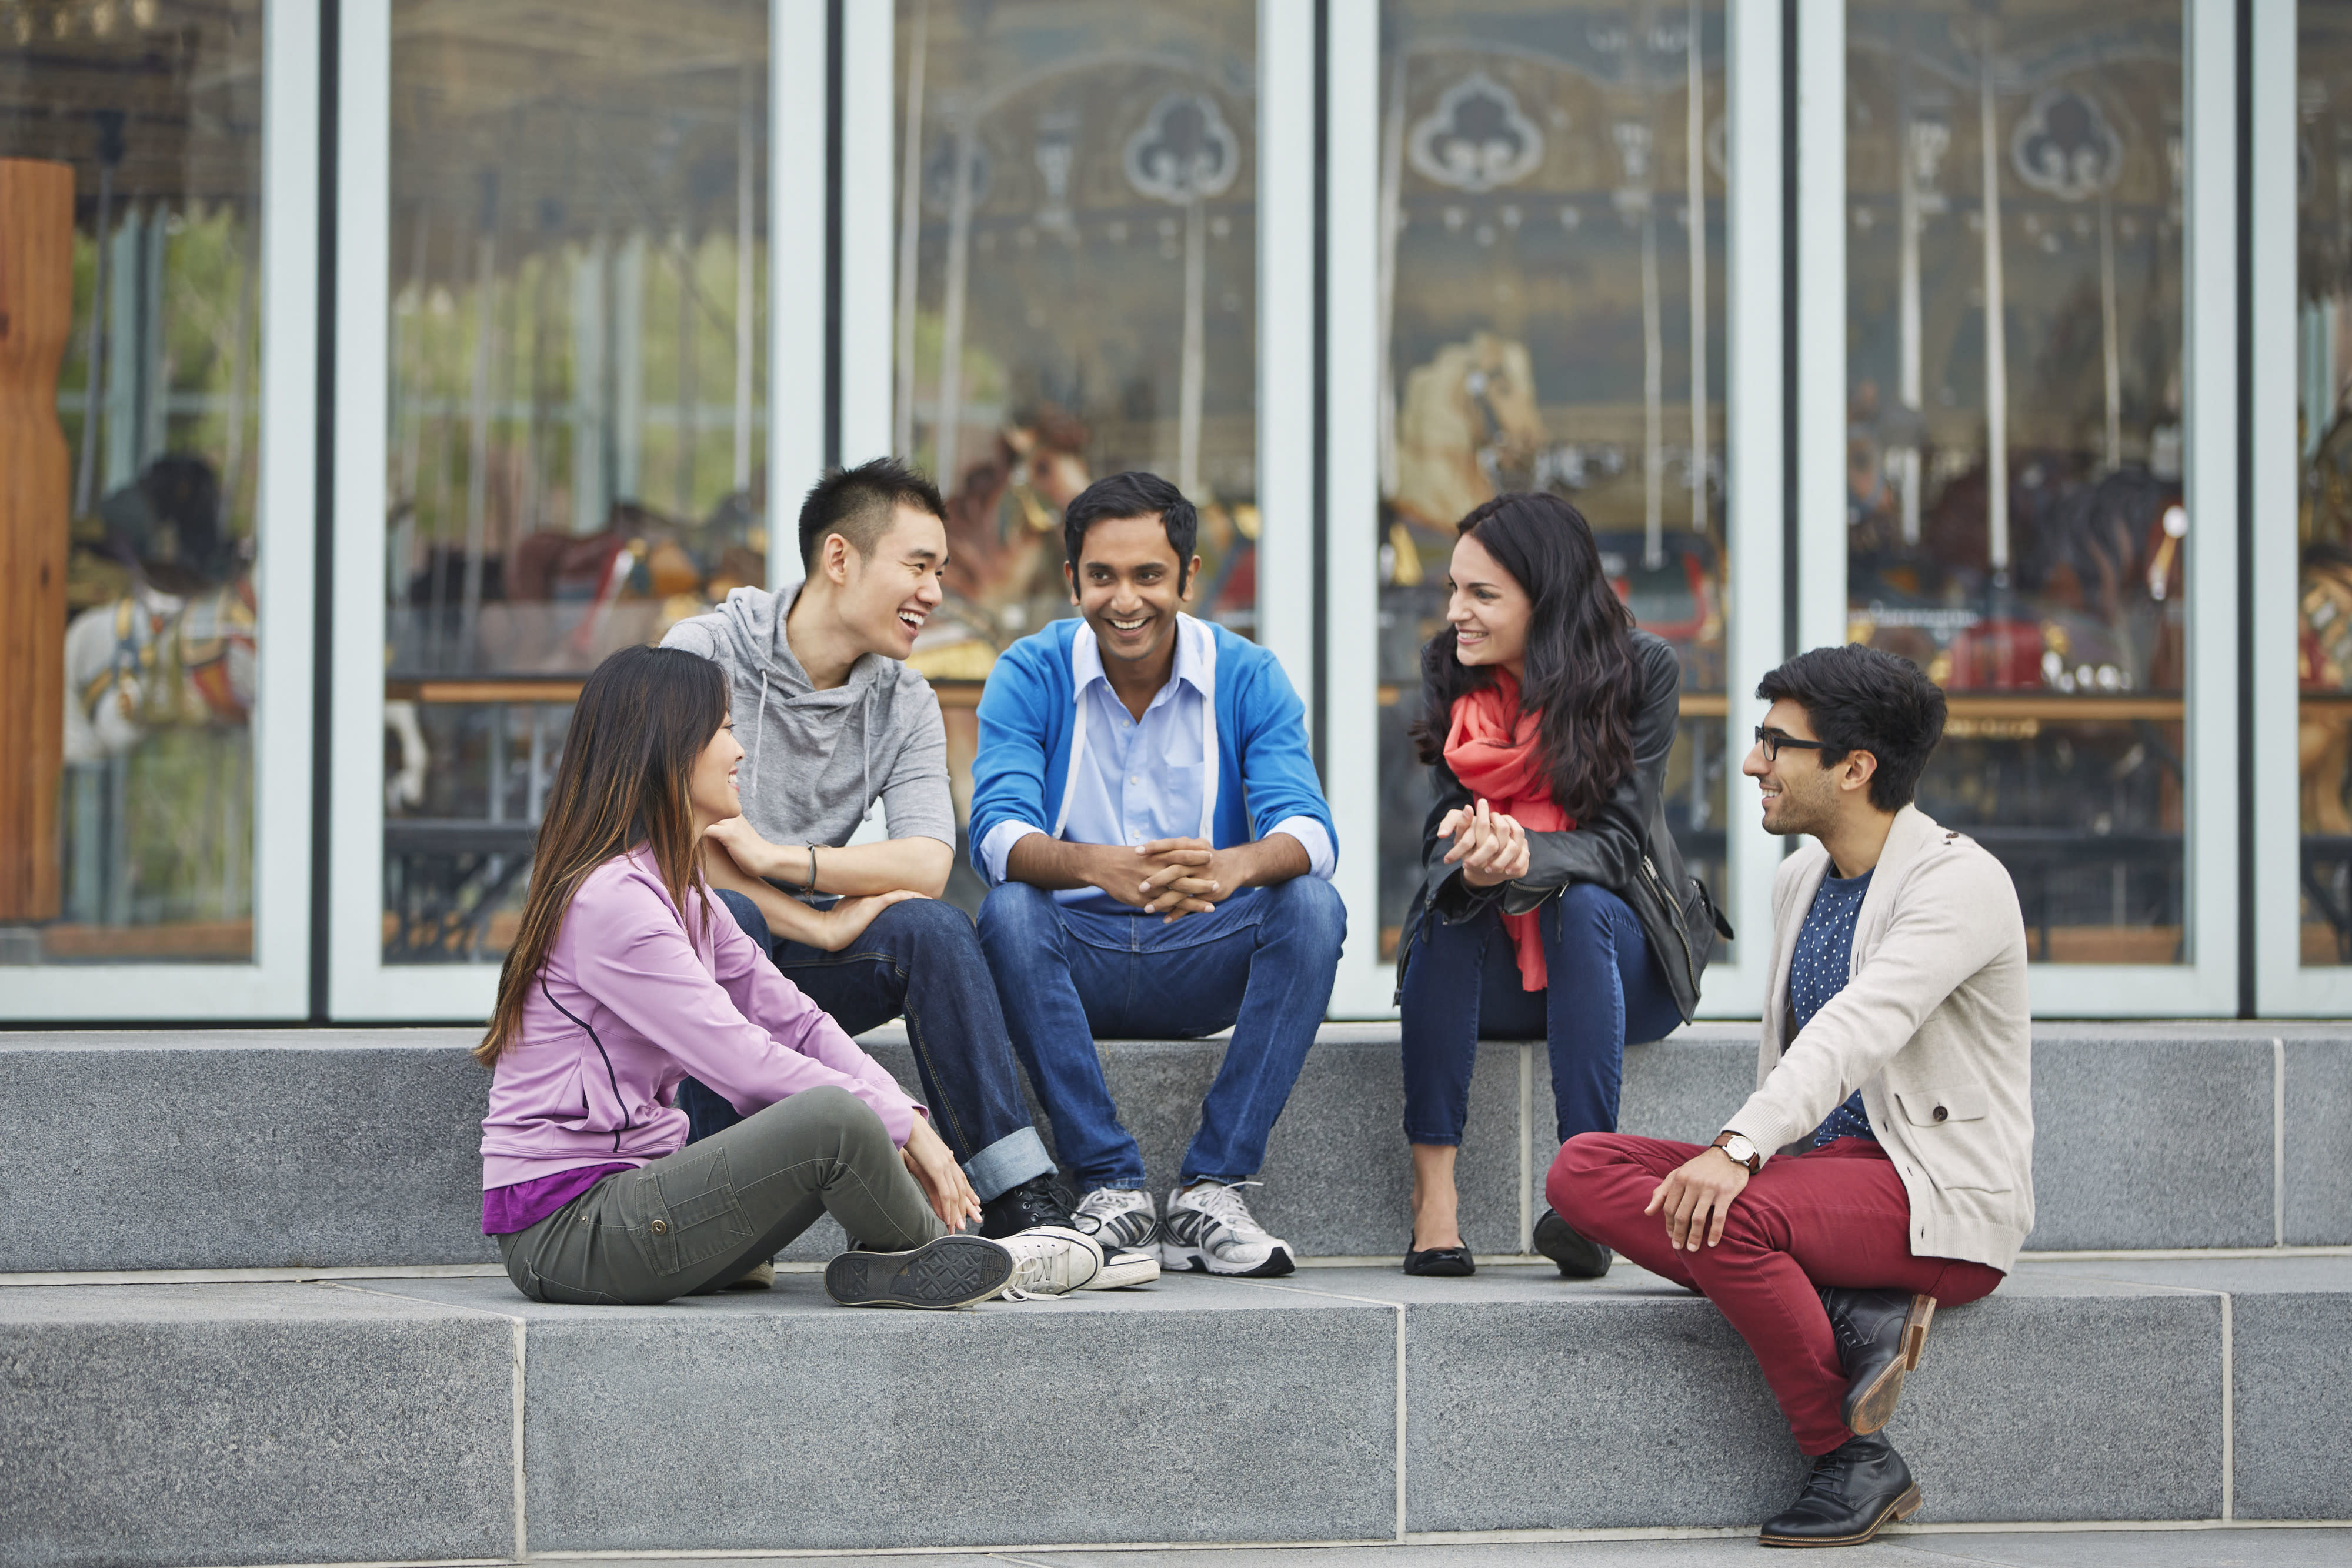 A group of students chatting in a park